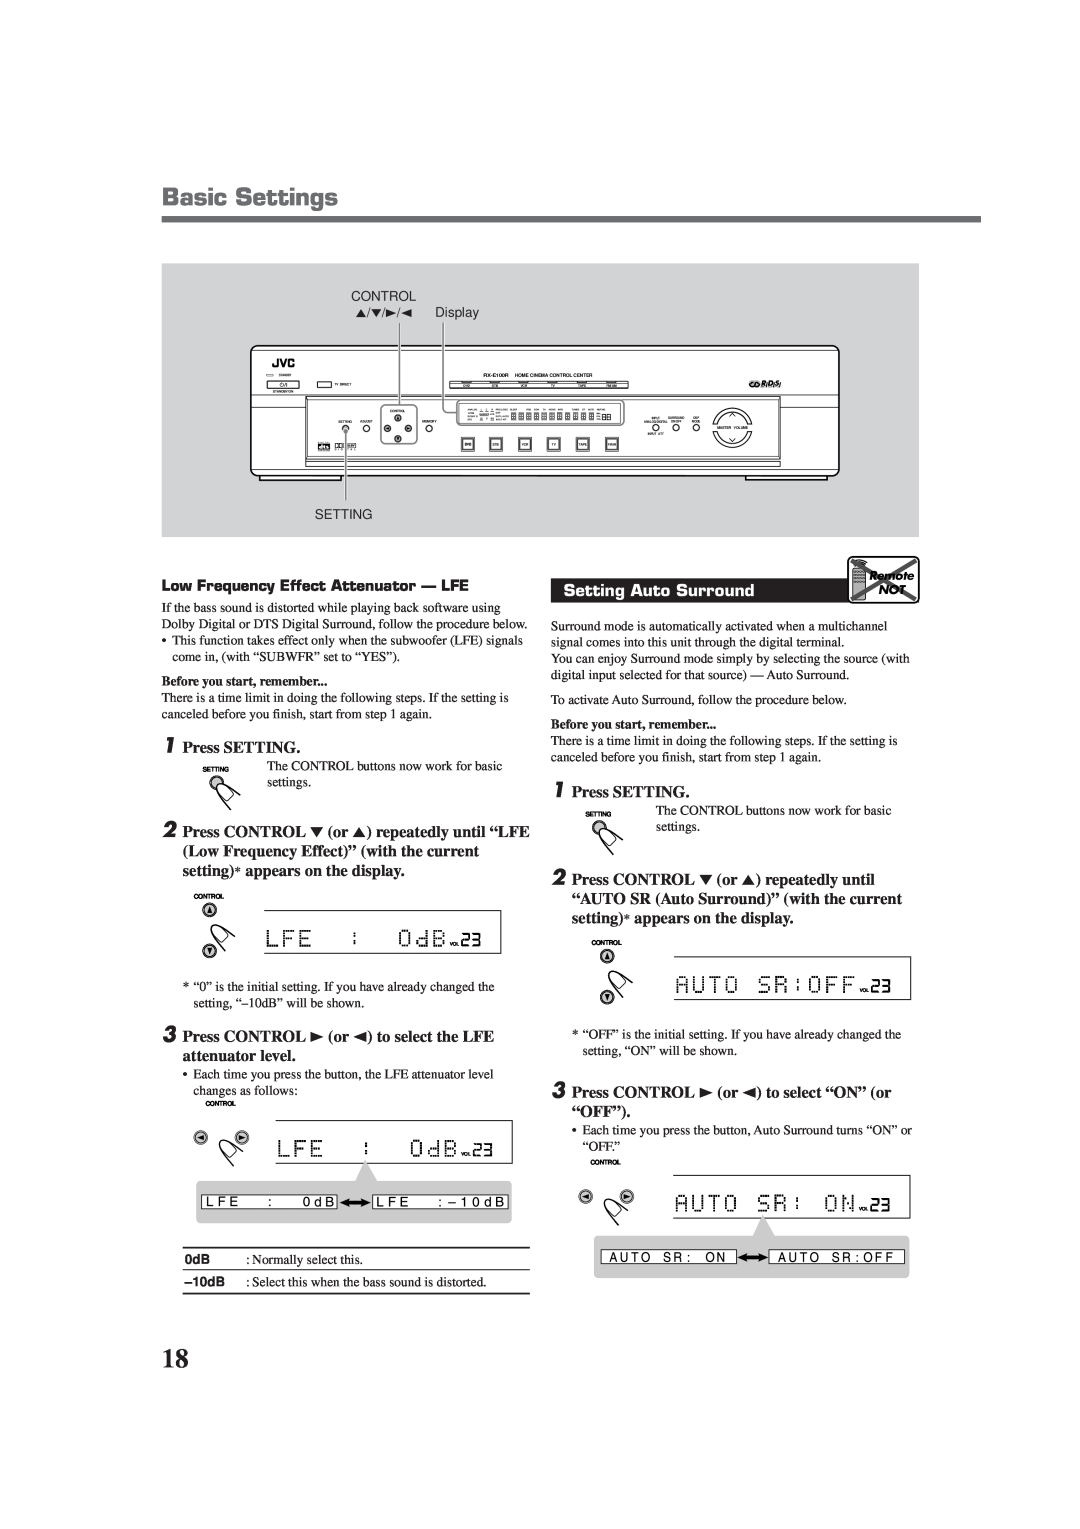 JVC RX-E100RSL manual Setting Auto Surround, 3Press CONTROL 3 or 2 to select “ON” or “OFF”, Basic Settings, 1Press SETTING 